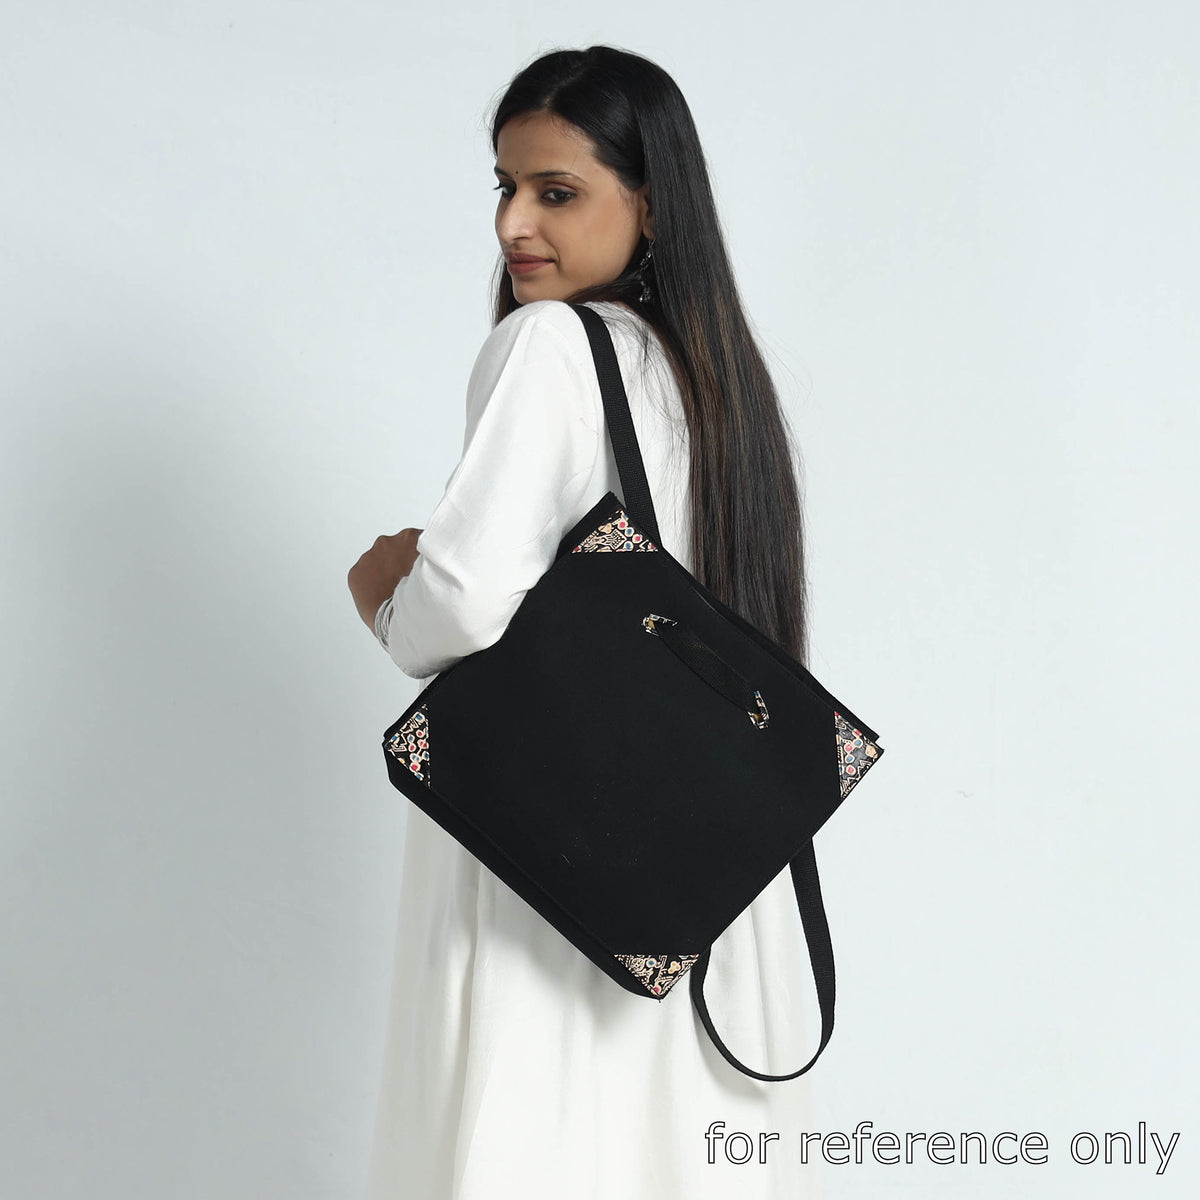 Black - Handcrafted Canvas Cotton & Leather Cross Body Bag